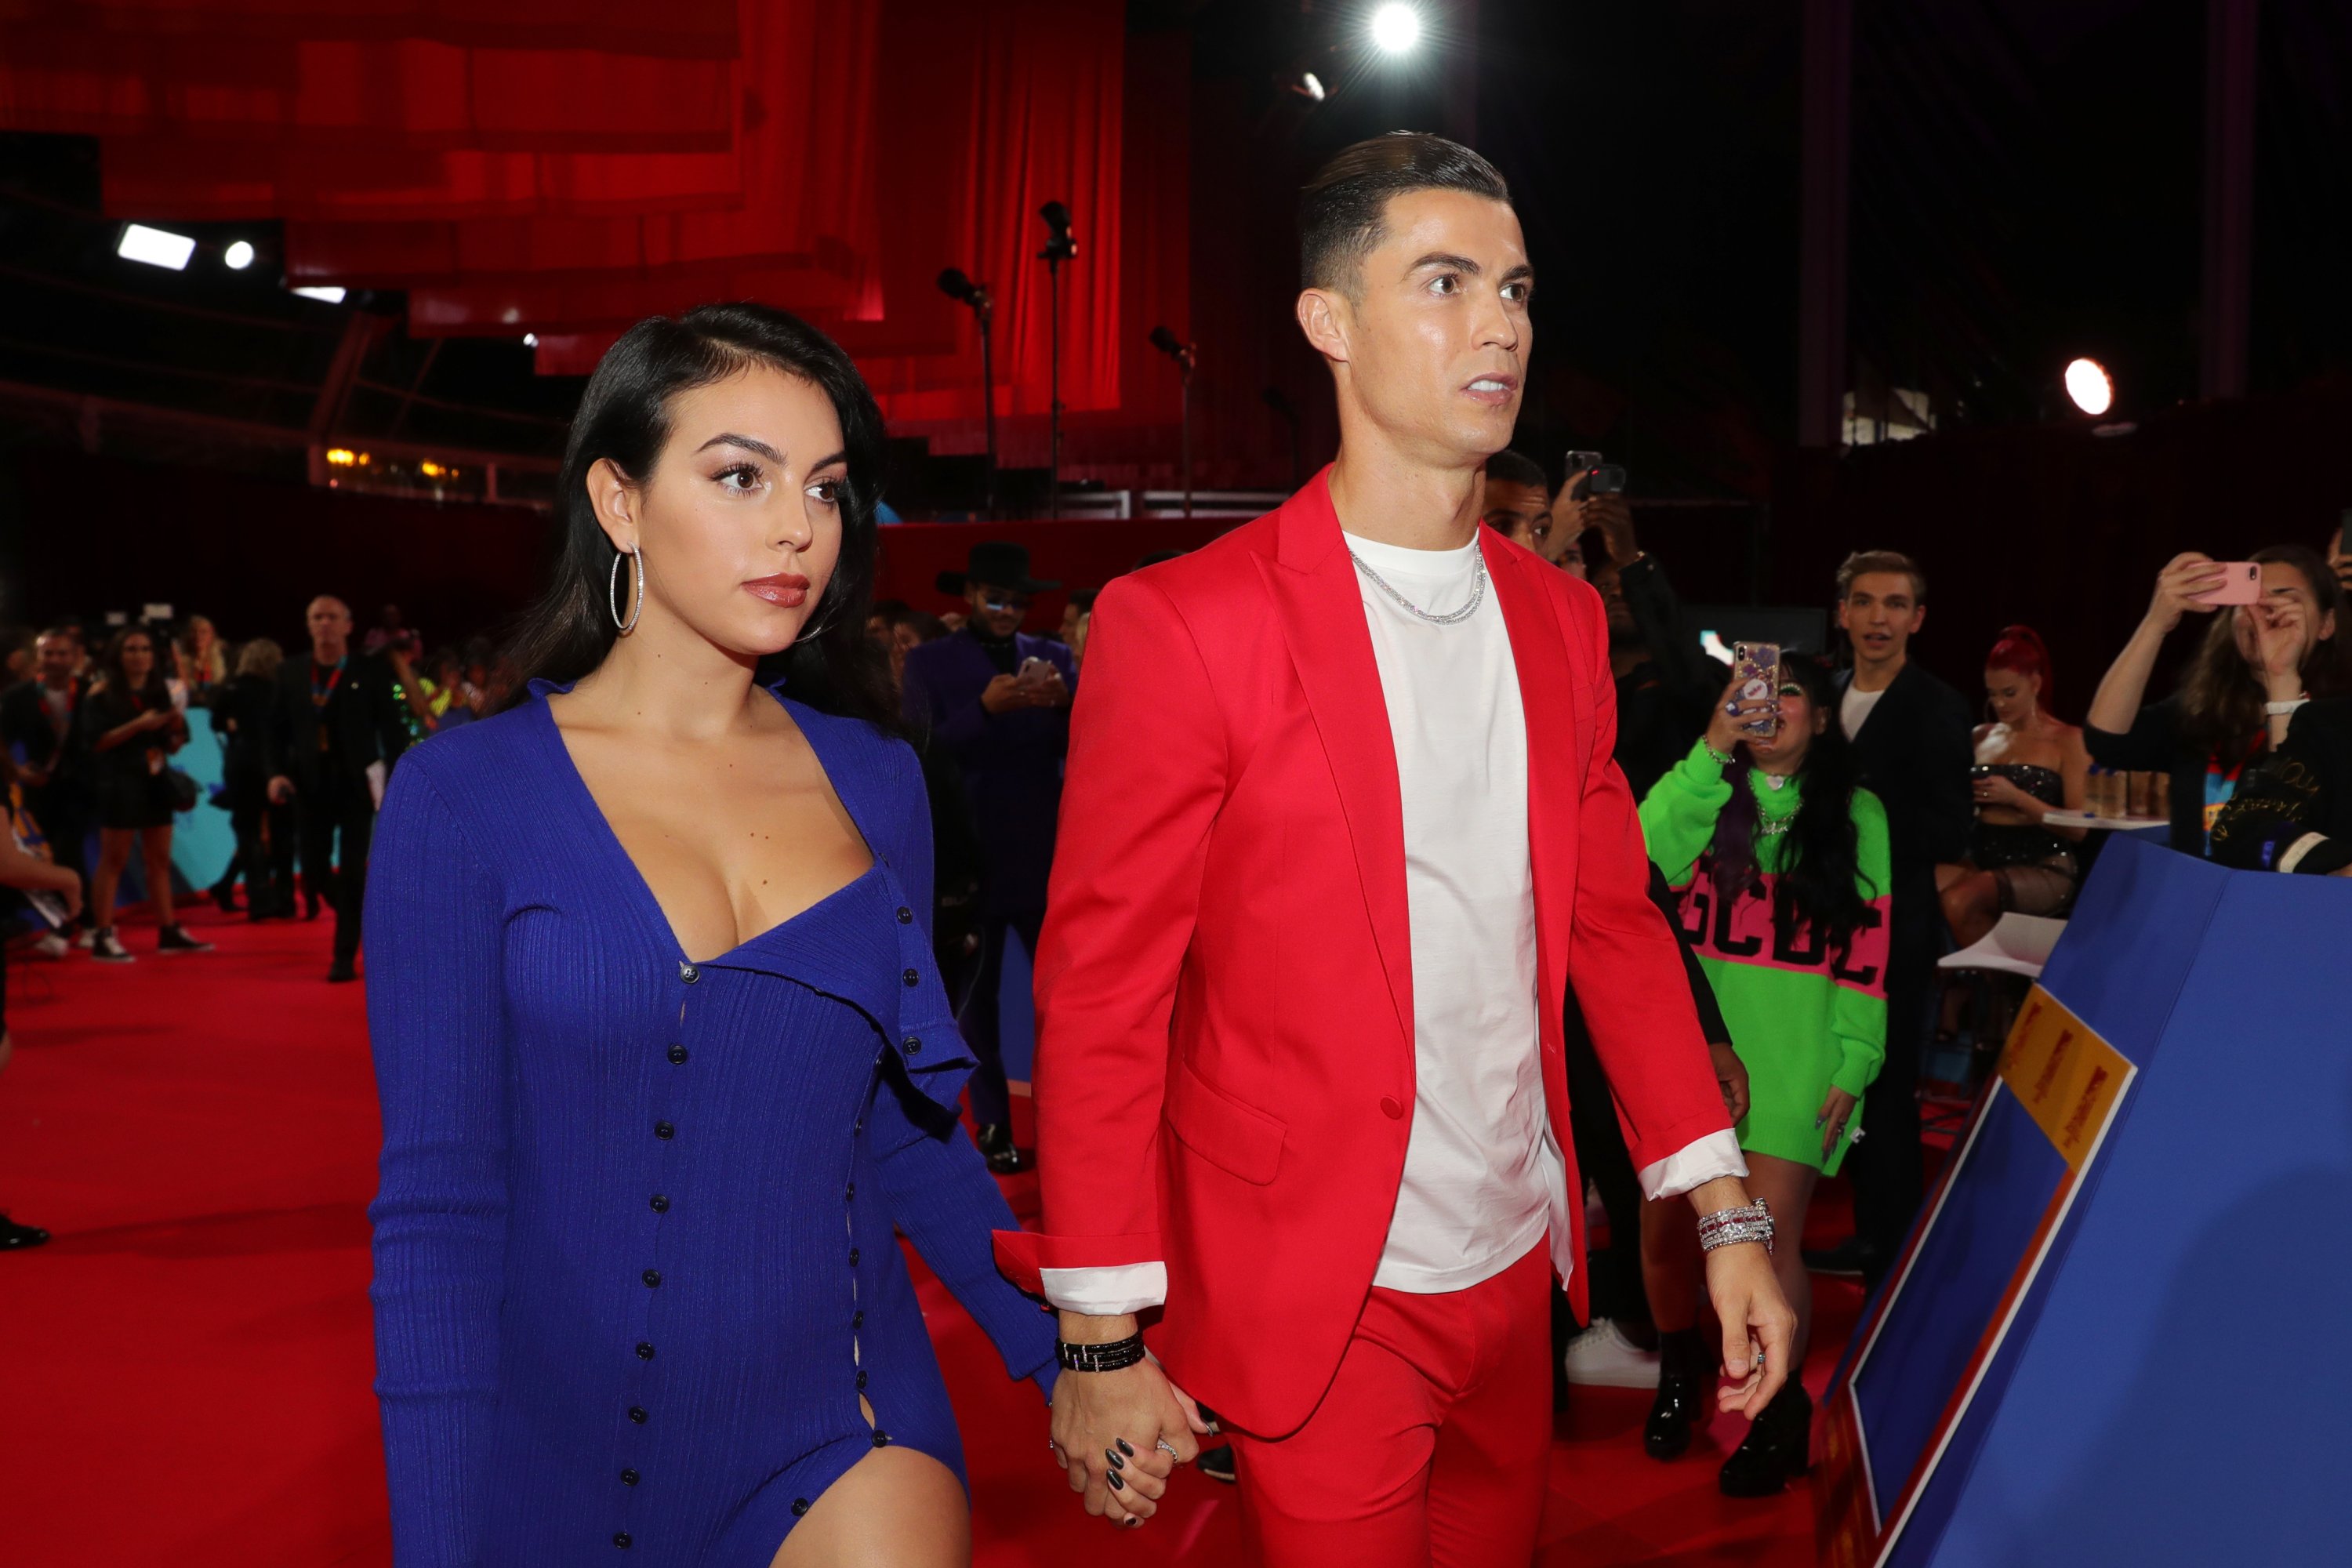 Trouble in paradise: Ronaldo angry with Georgina's behavior | Daily Sabah